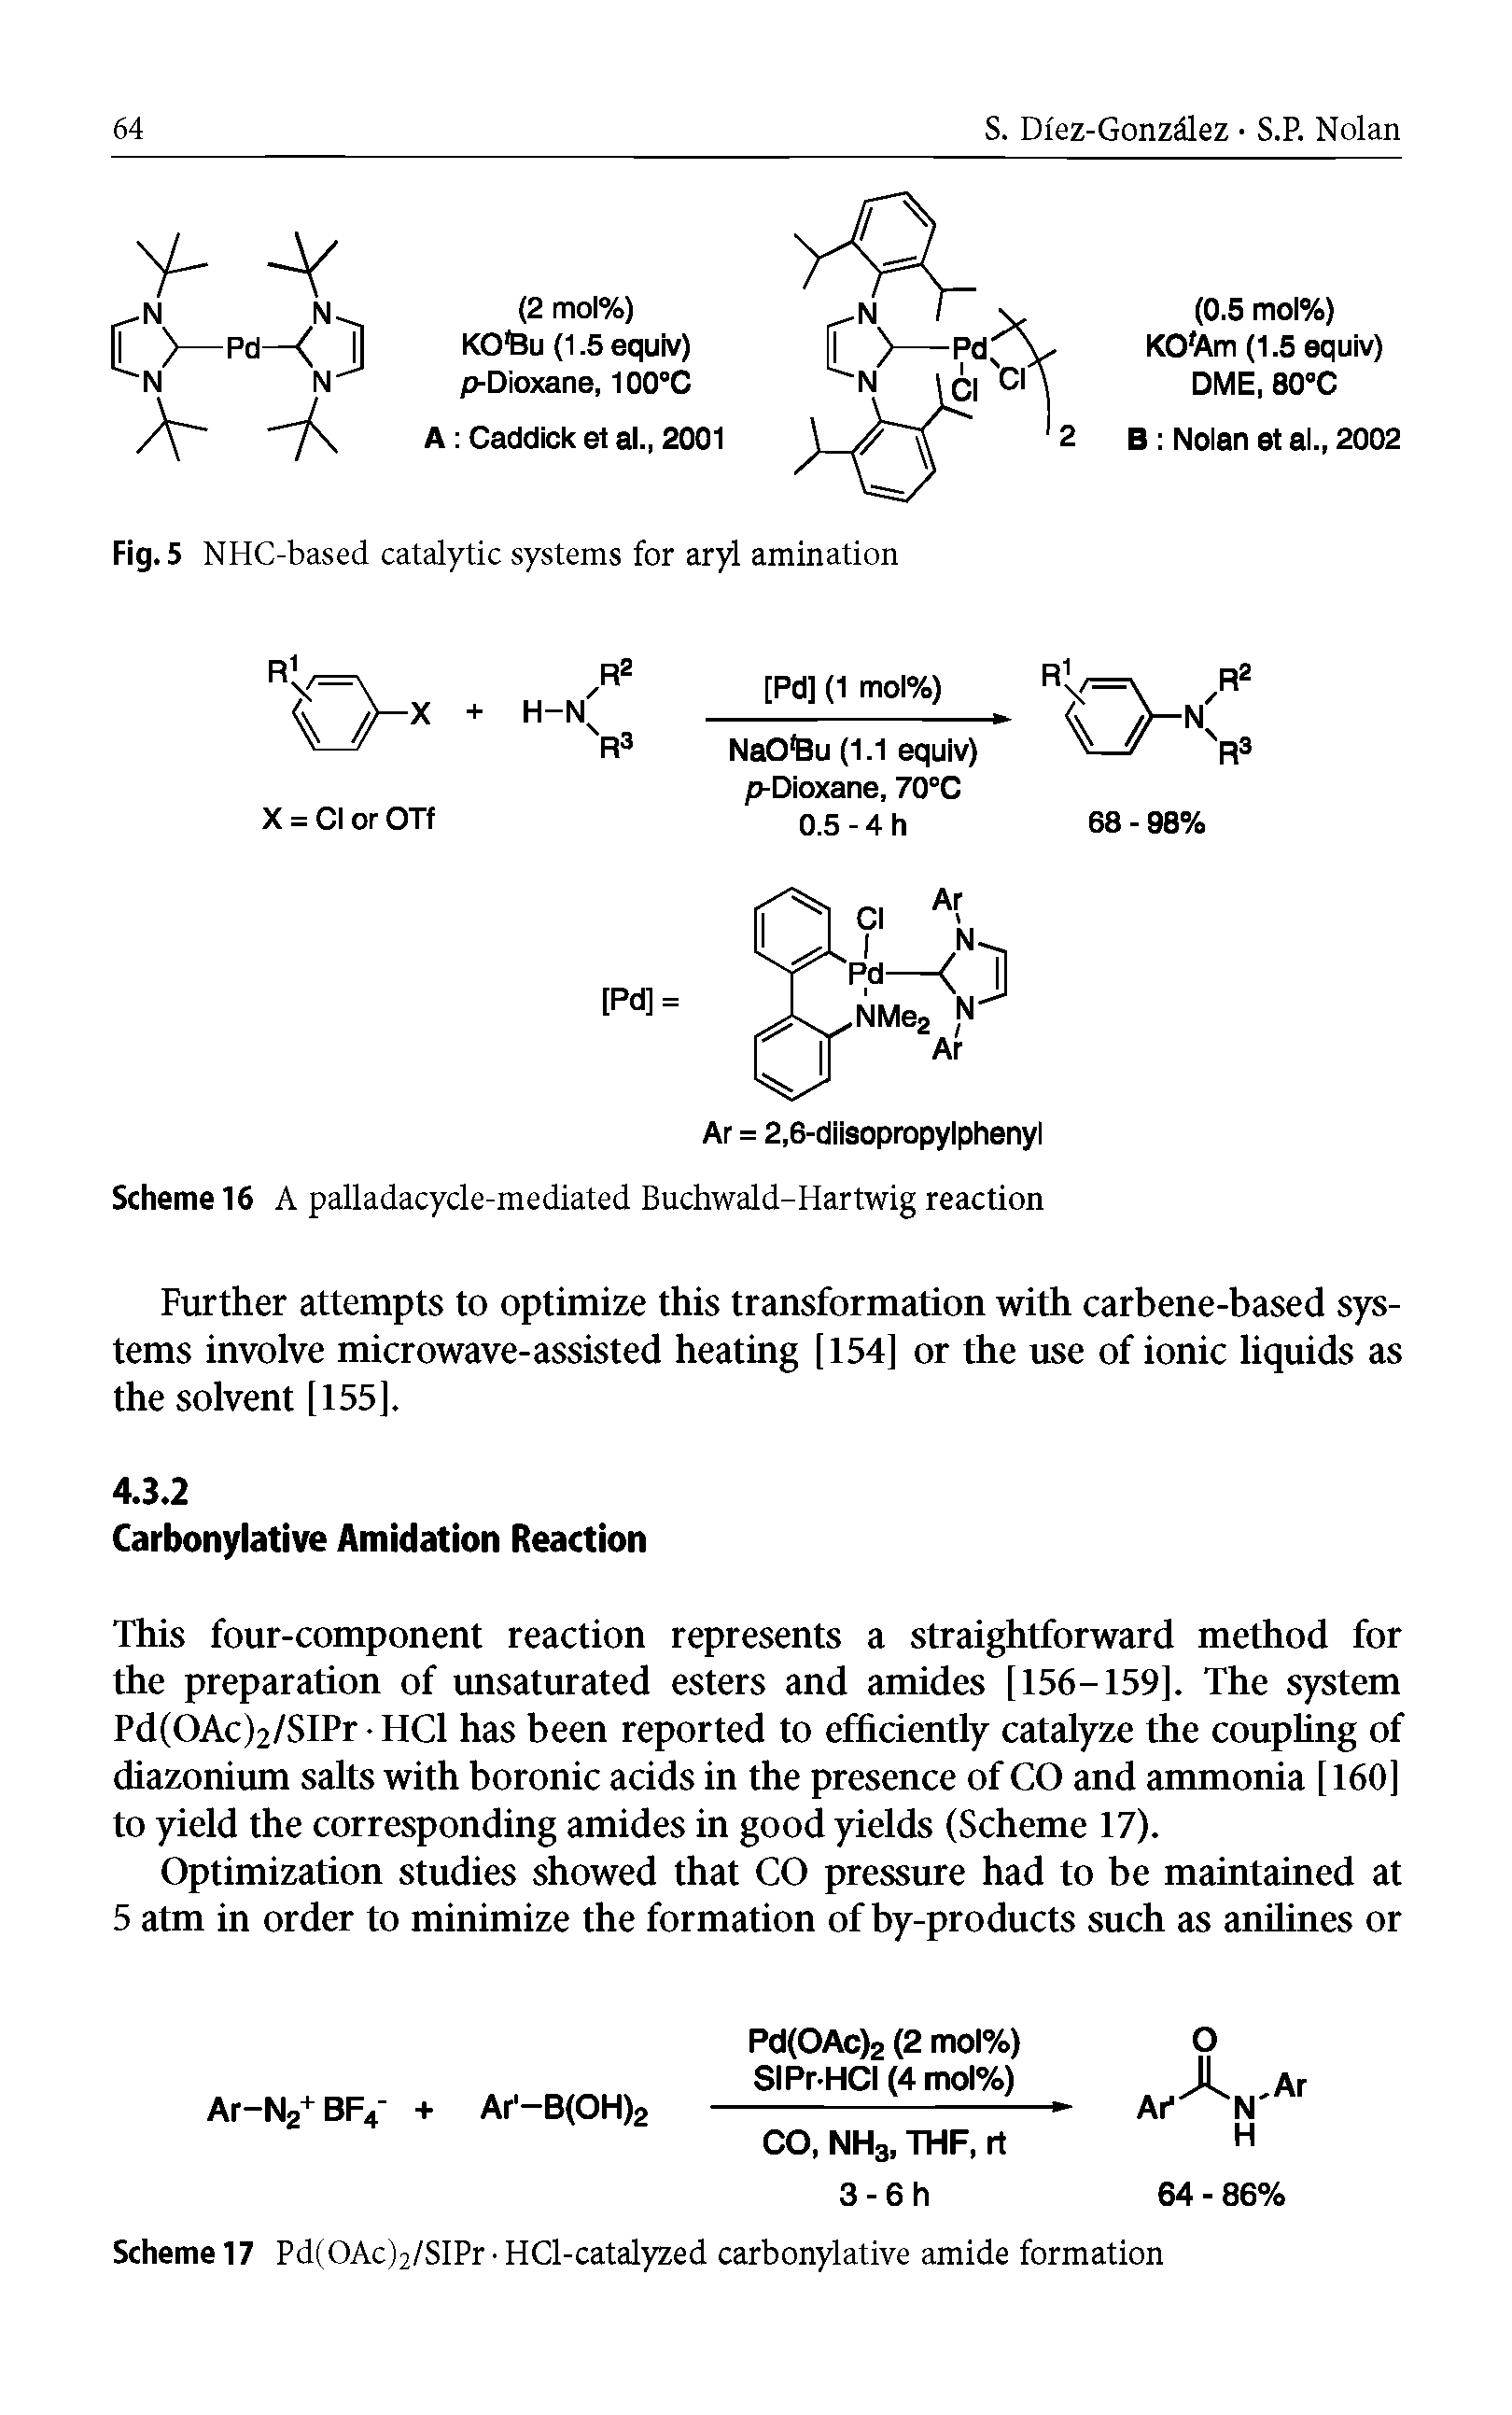 Scheme 17 Pd(OAc)2/SIPr HCl-catalyzed carbonylative amide formation...